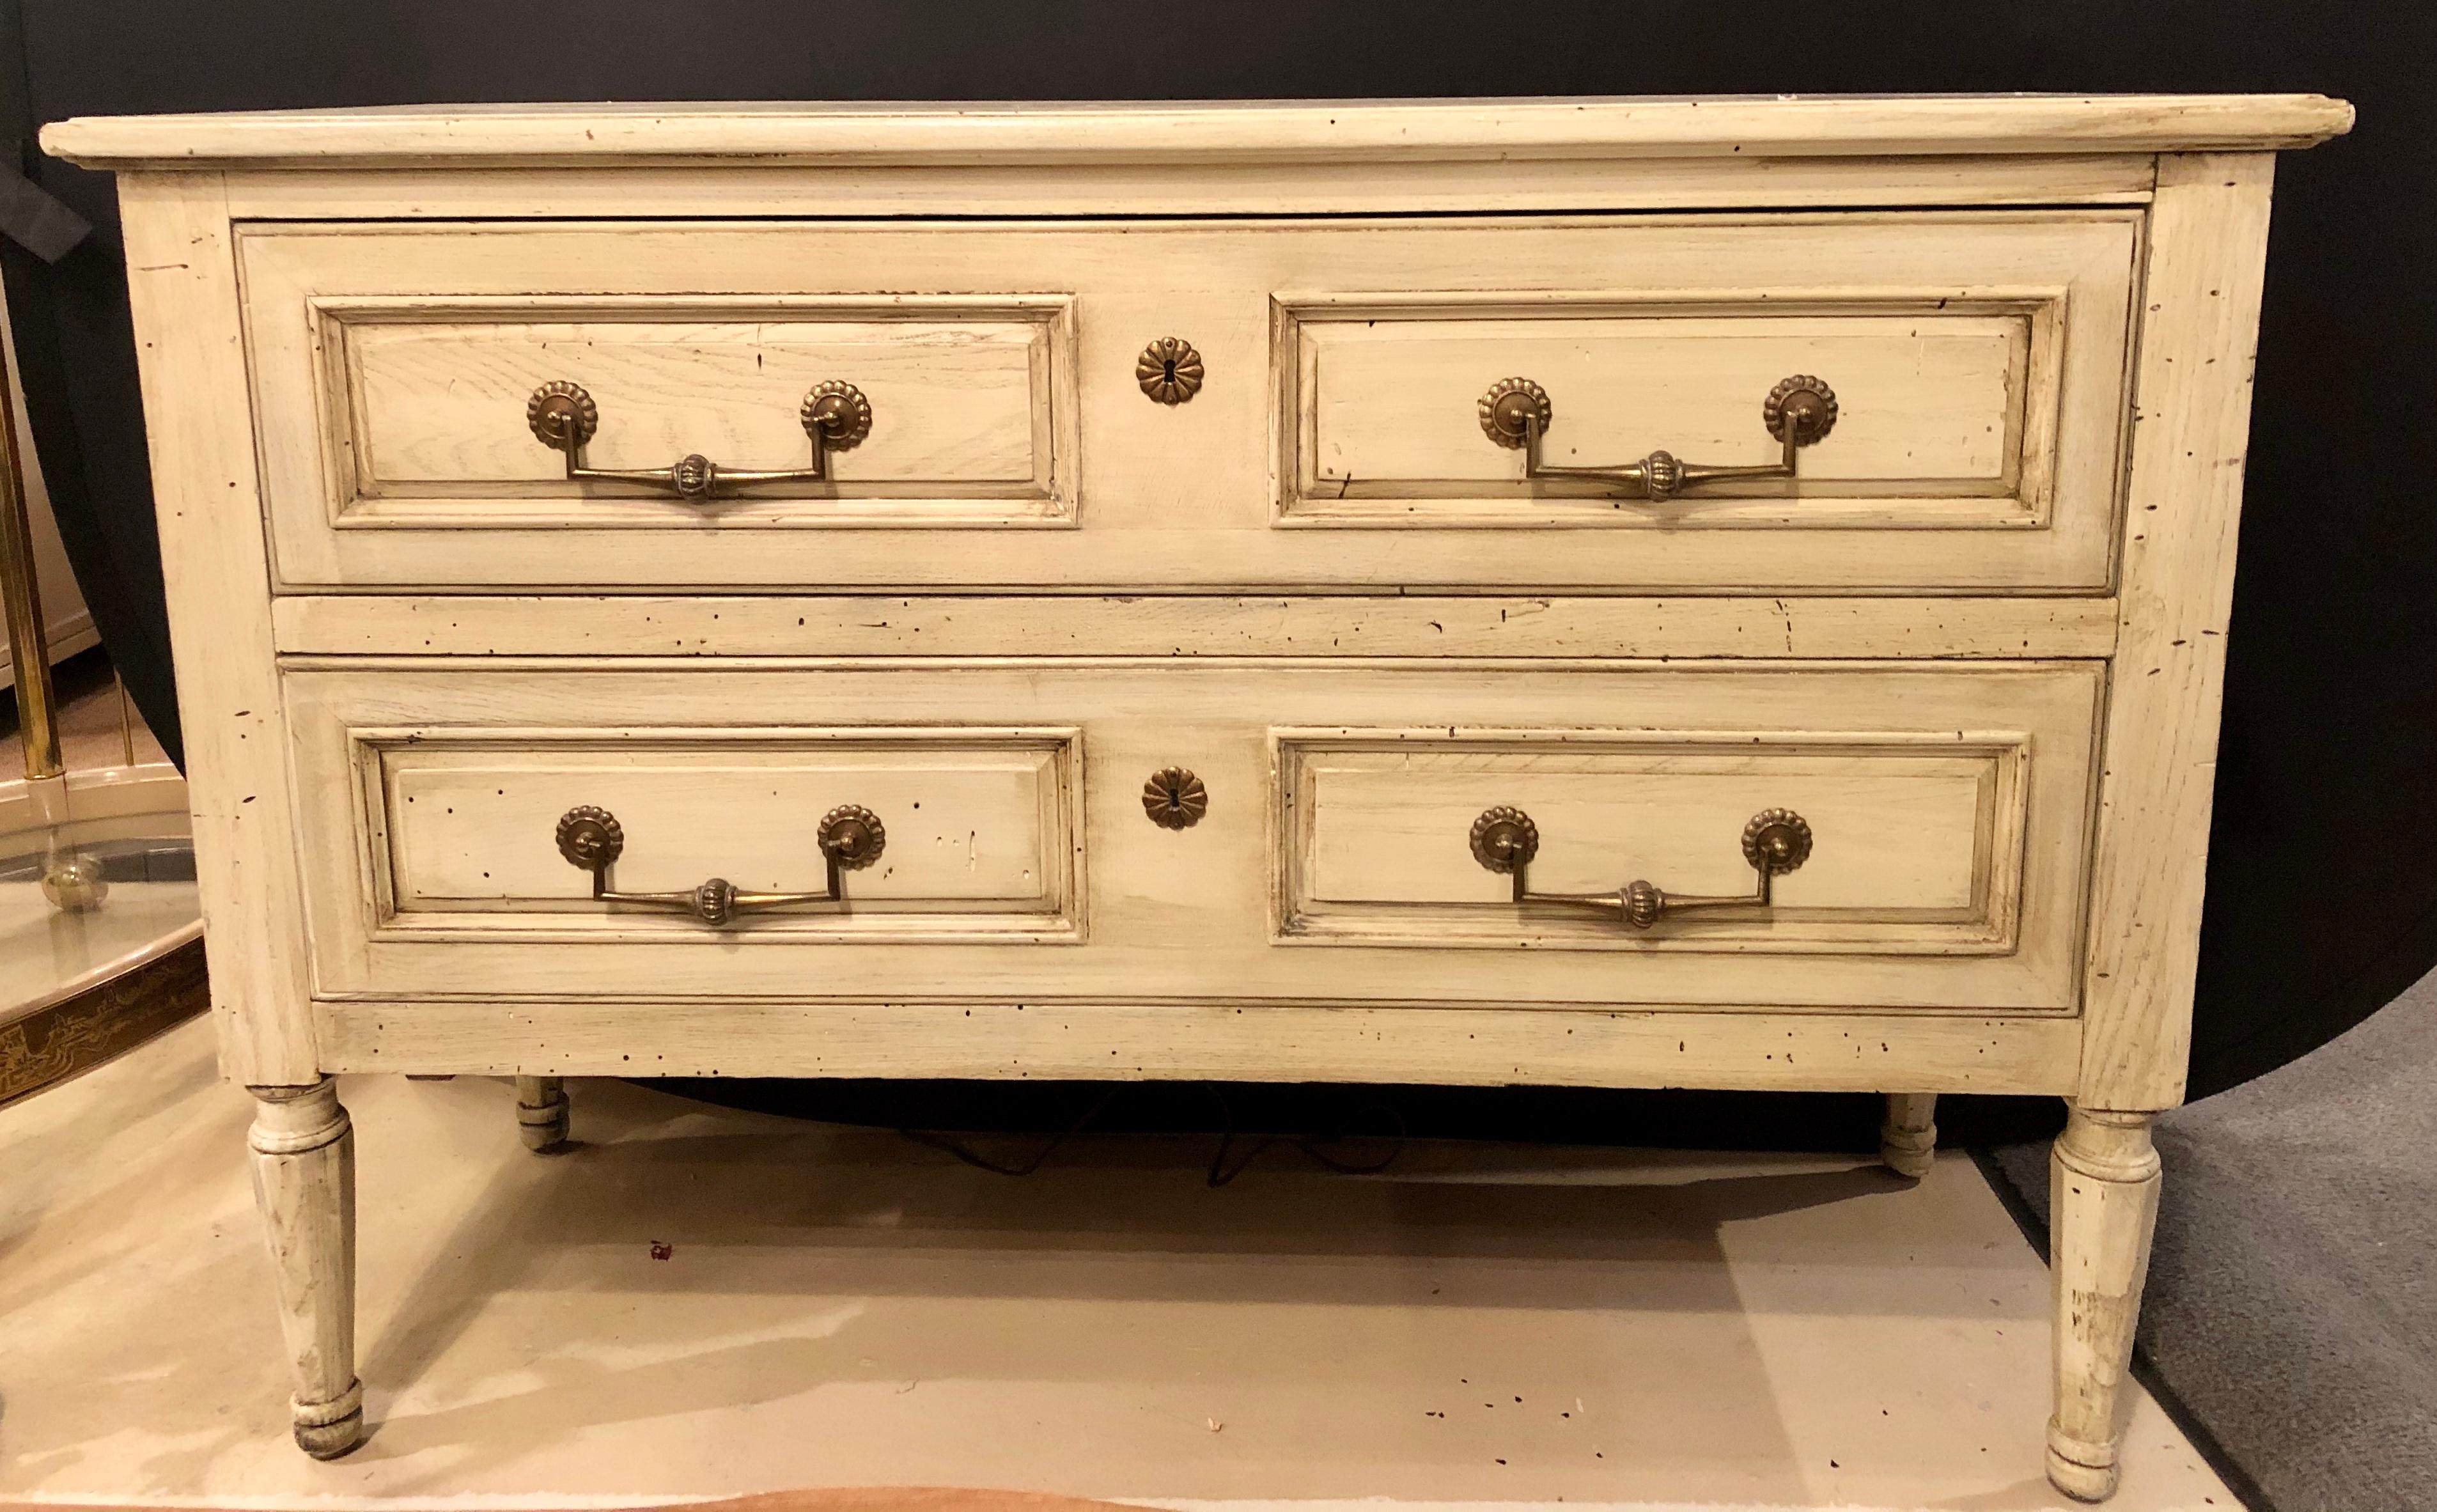 White Mashed Chest Henredon Fine Furniture Stamped. A beautiful Henredon vintage French Provencial two drawer dresser. Since 1945, Henredon has created fine furnishings and accessories that are carefully designed to withstand time and trends. Sleek